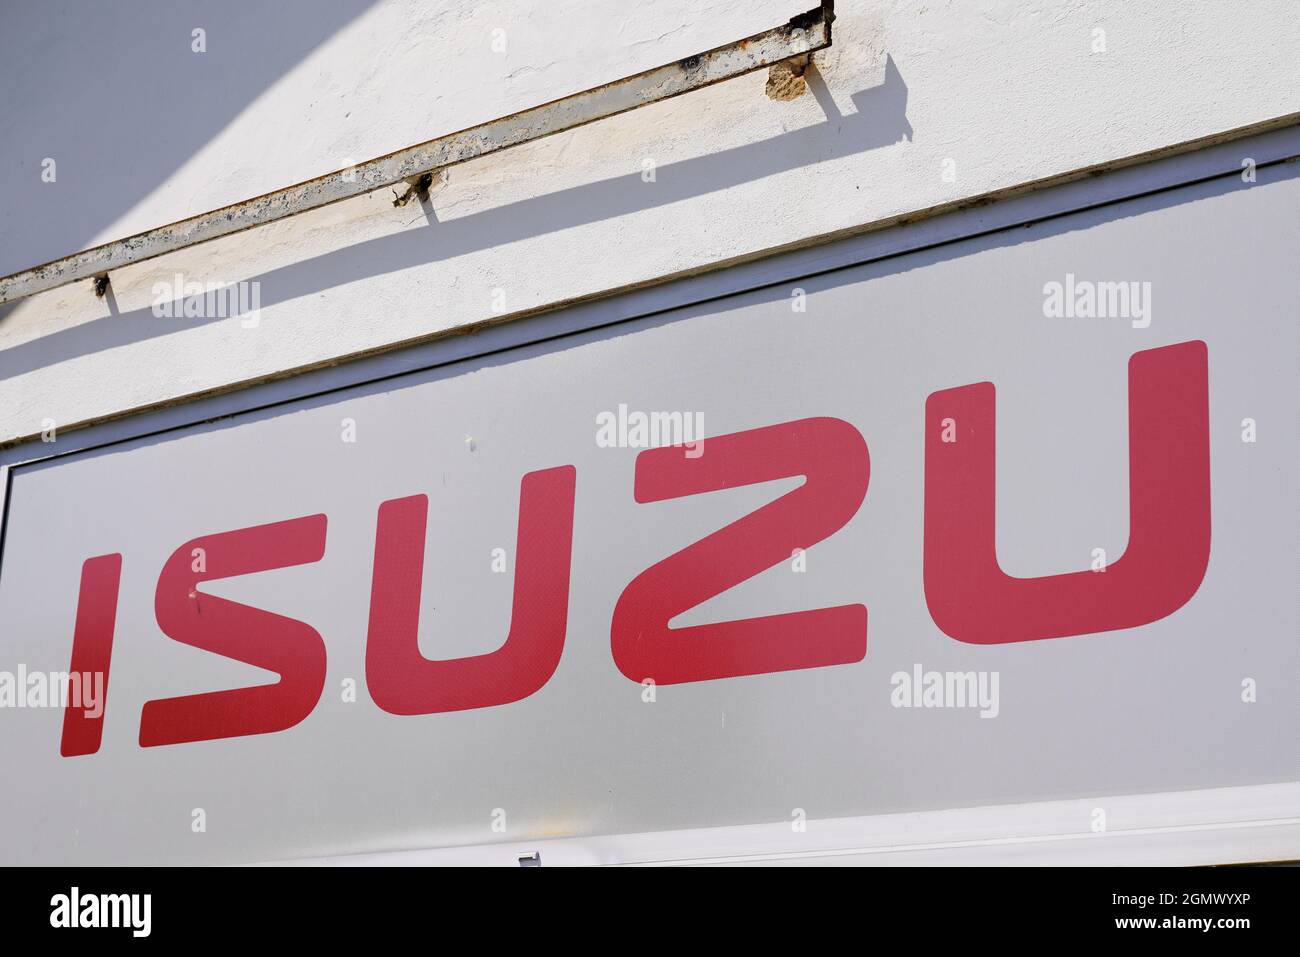 Bordeaux , Aquitaine  France - 09 05 2021 : Isuzu car truck sign logo and brand text in dealership garage station Stock Photo